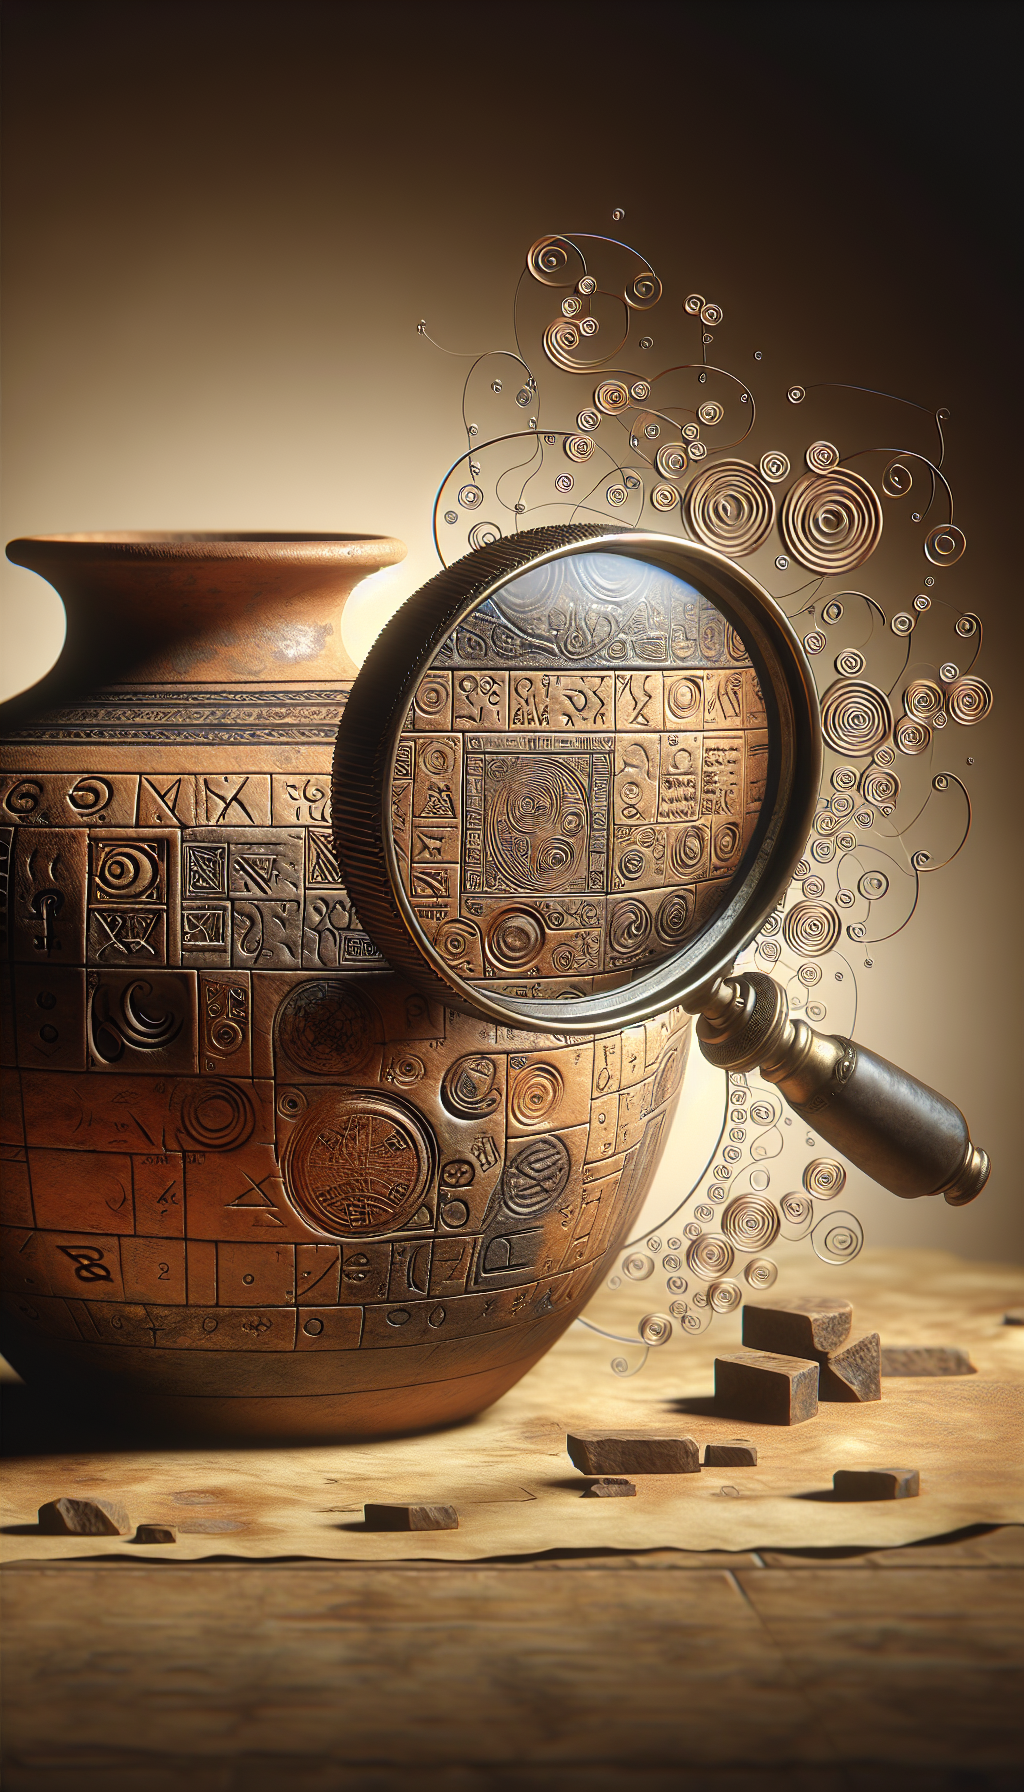 A vintage magnifying glass hovers over an ancient crock, zooming in on the cryptic stamps and symbols etched onto its surface. Beneath the lens, the markings come alive, transforming into a detailed map of intertwining histories and legacies, while swirling calligraphy tags each symbol with its origin and era, visually deciphering the code for identifying antique stoneware crock markings.